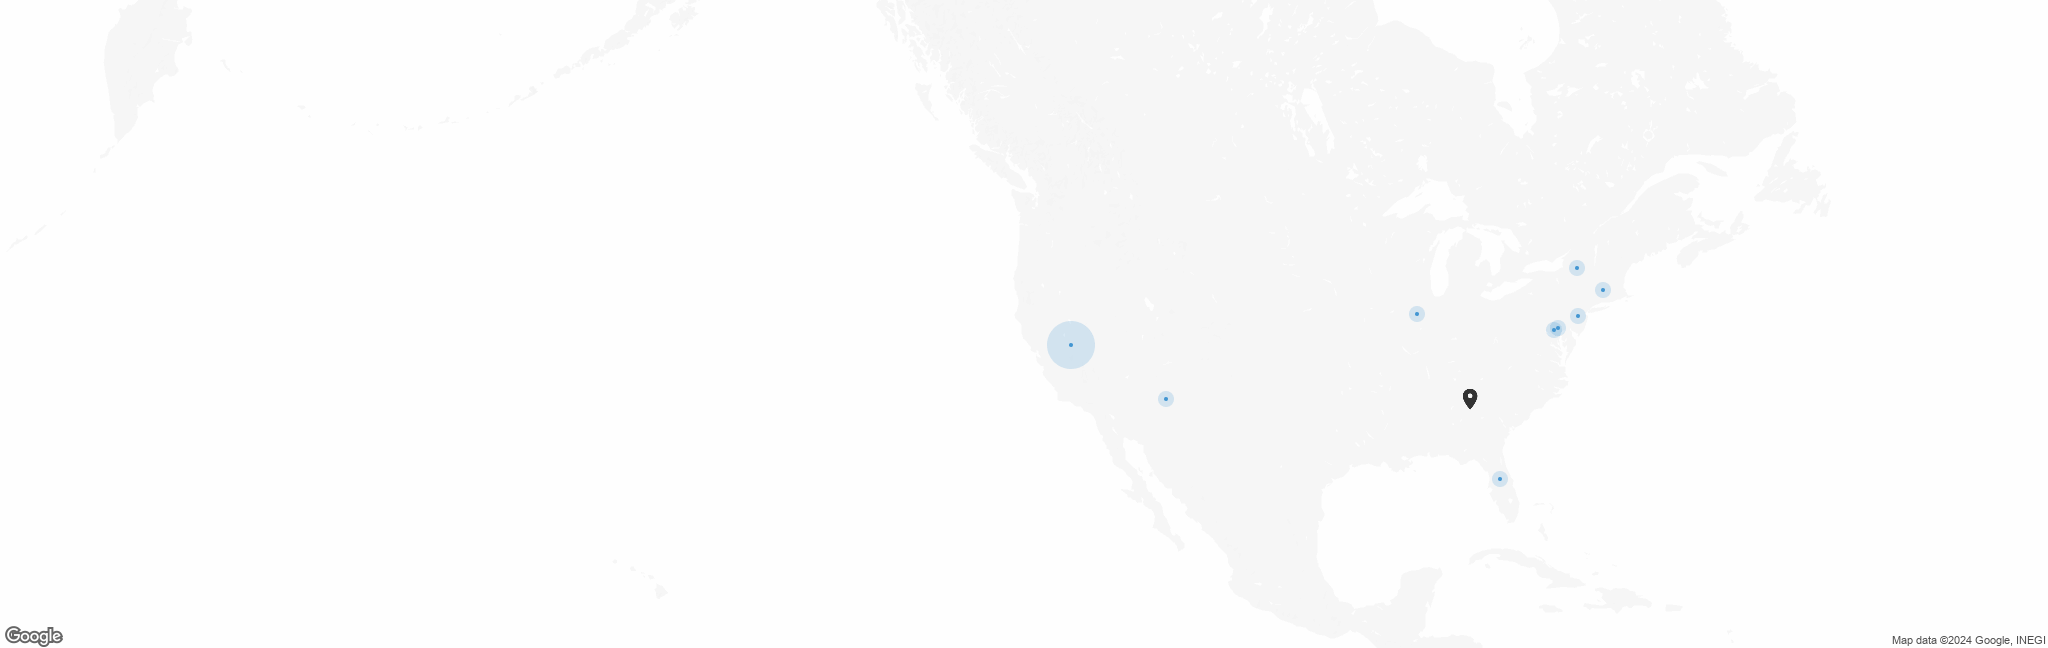 Map of US with pin of Alejandre Foundation location